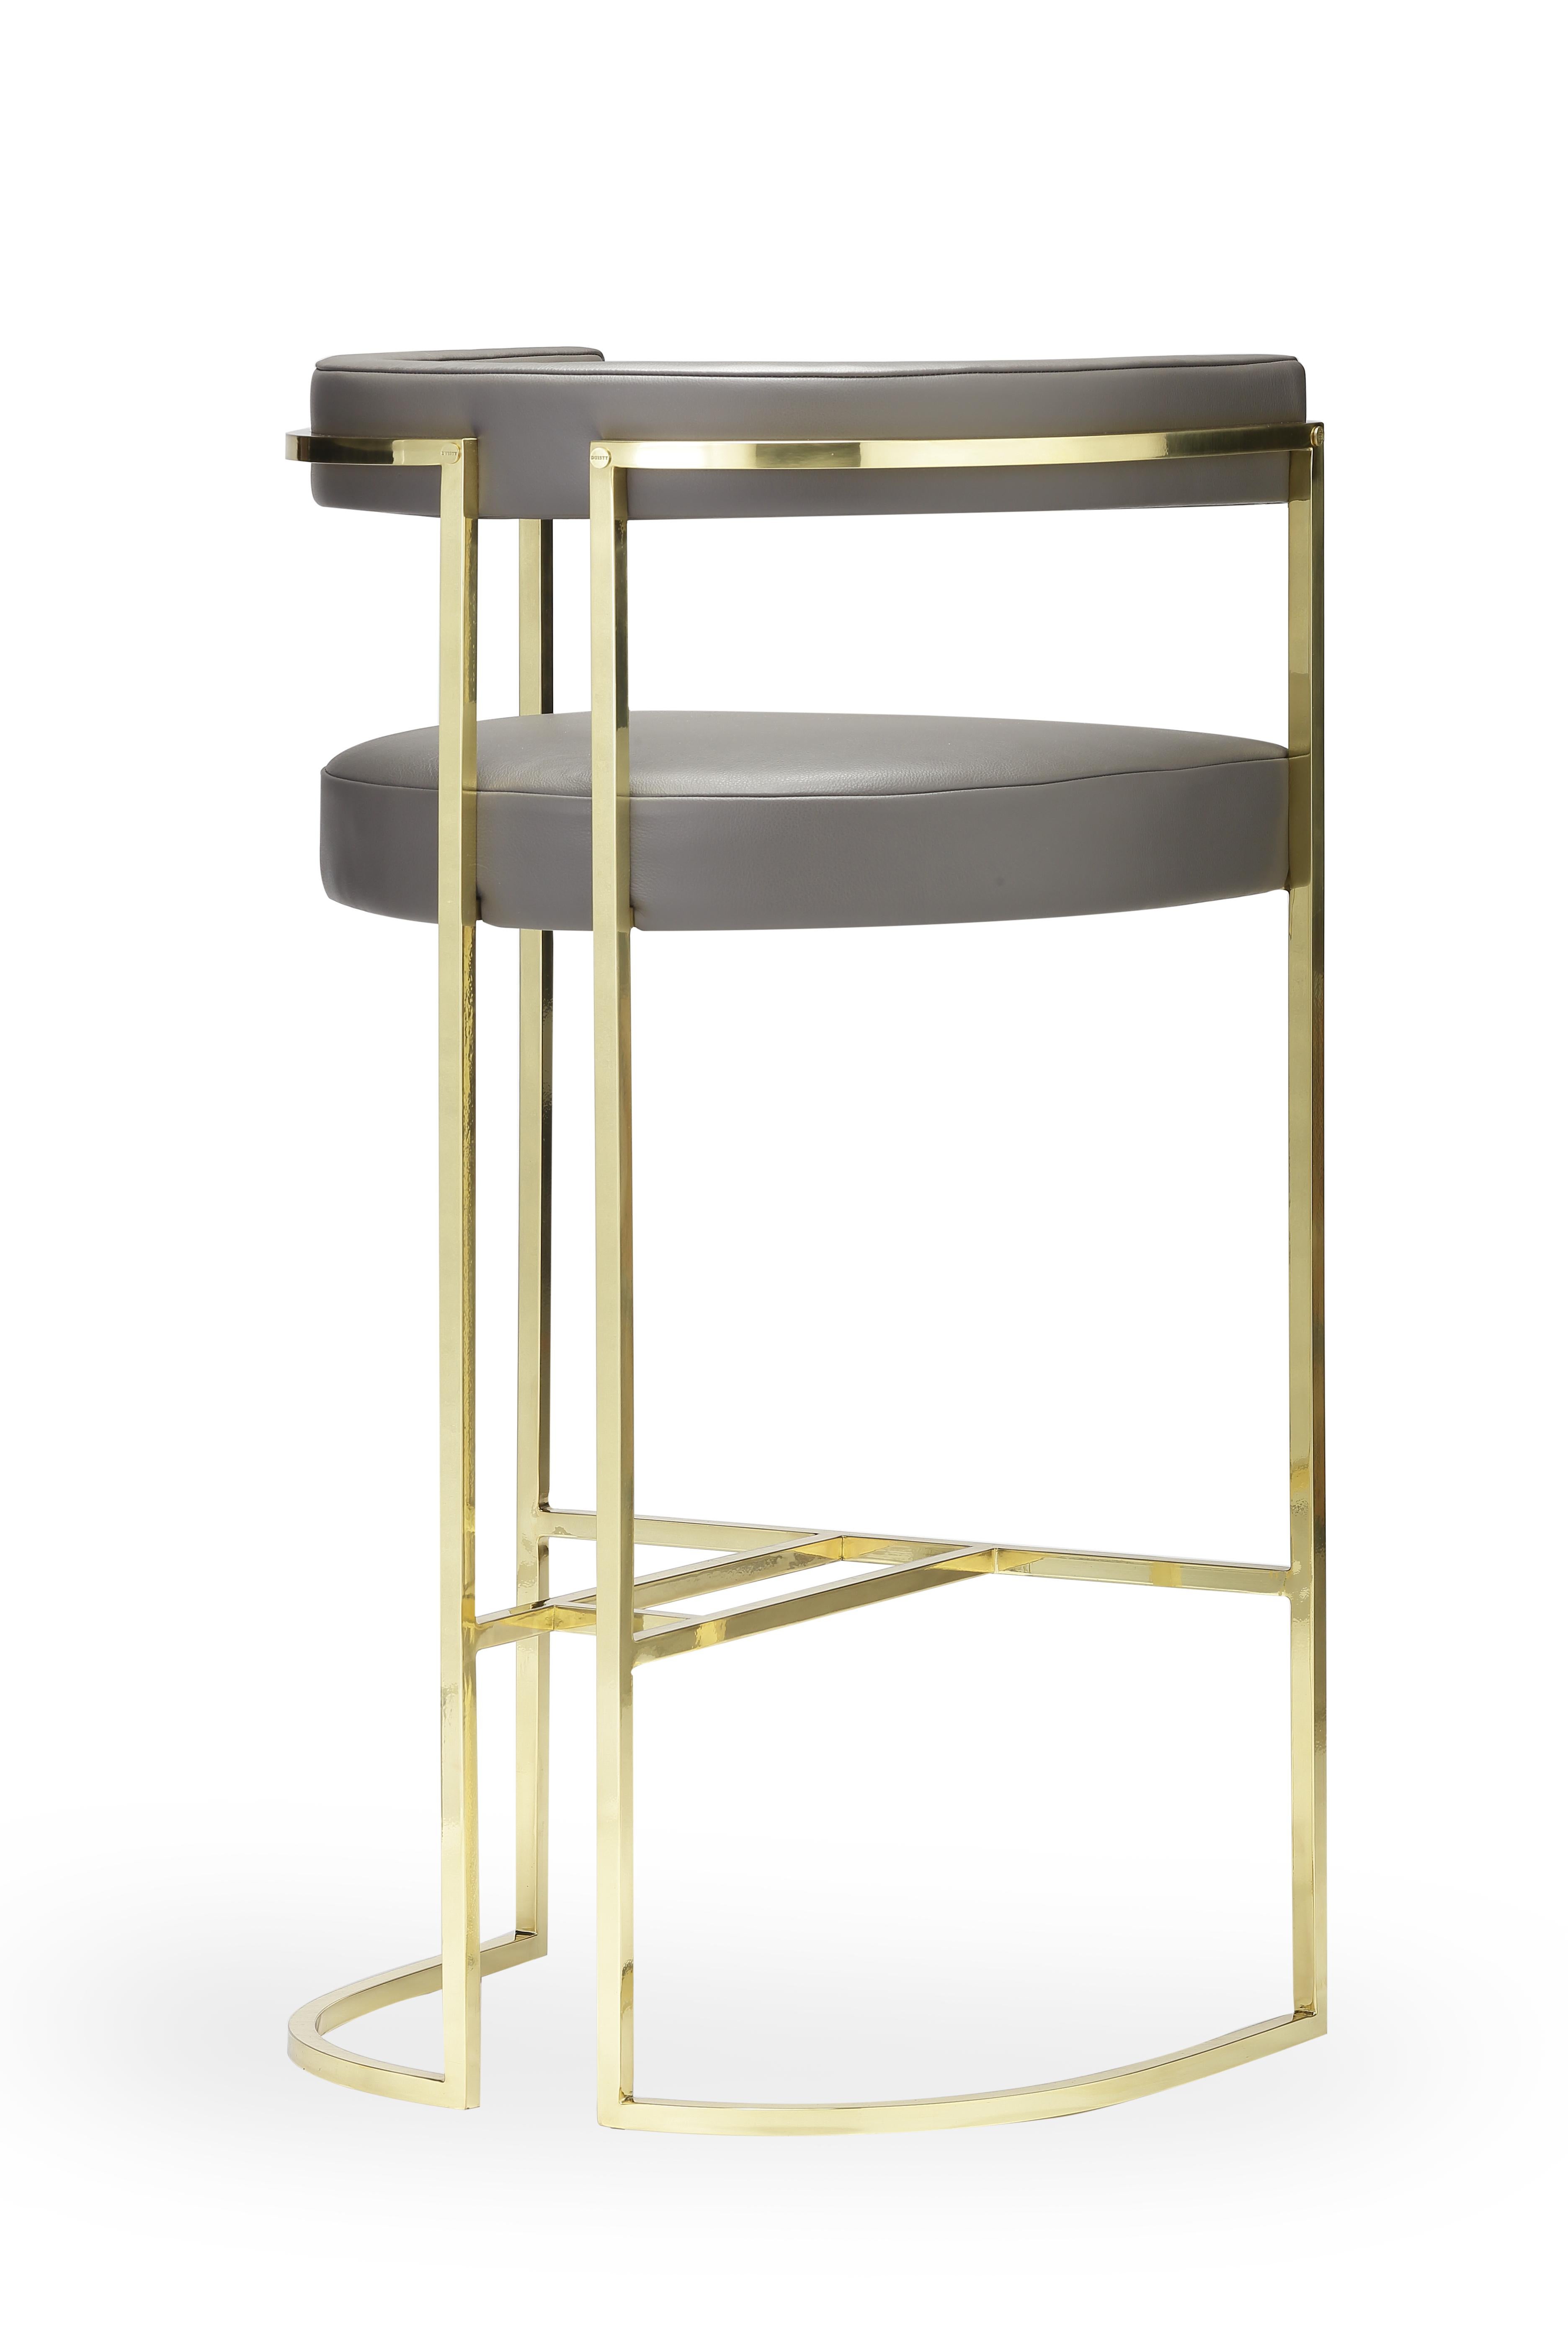 Julius Bar Stool, Brass Structure, Handcrafted in Portugal by Duistt

The JULIUS bar stool is a timeless and understated luxury piece. Constructed with noble materials like brass and leather. A stylish bar chair perfect to adorn any bar or living